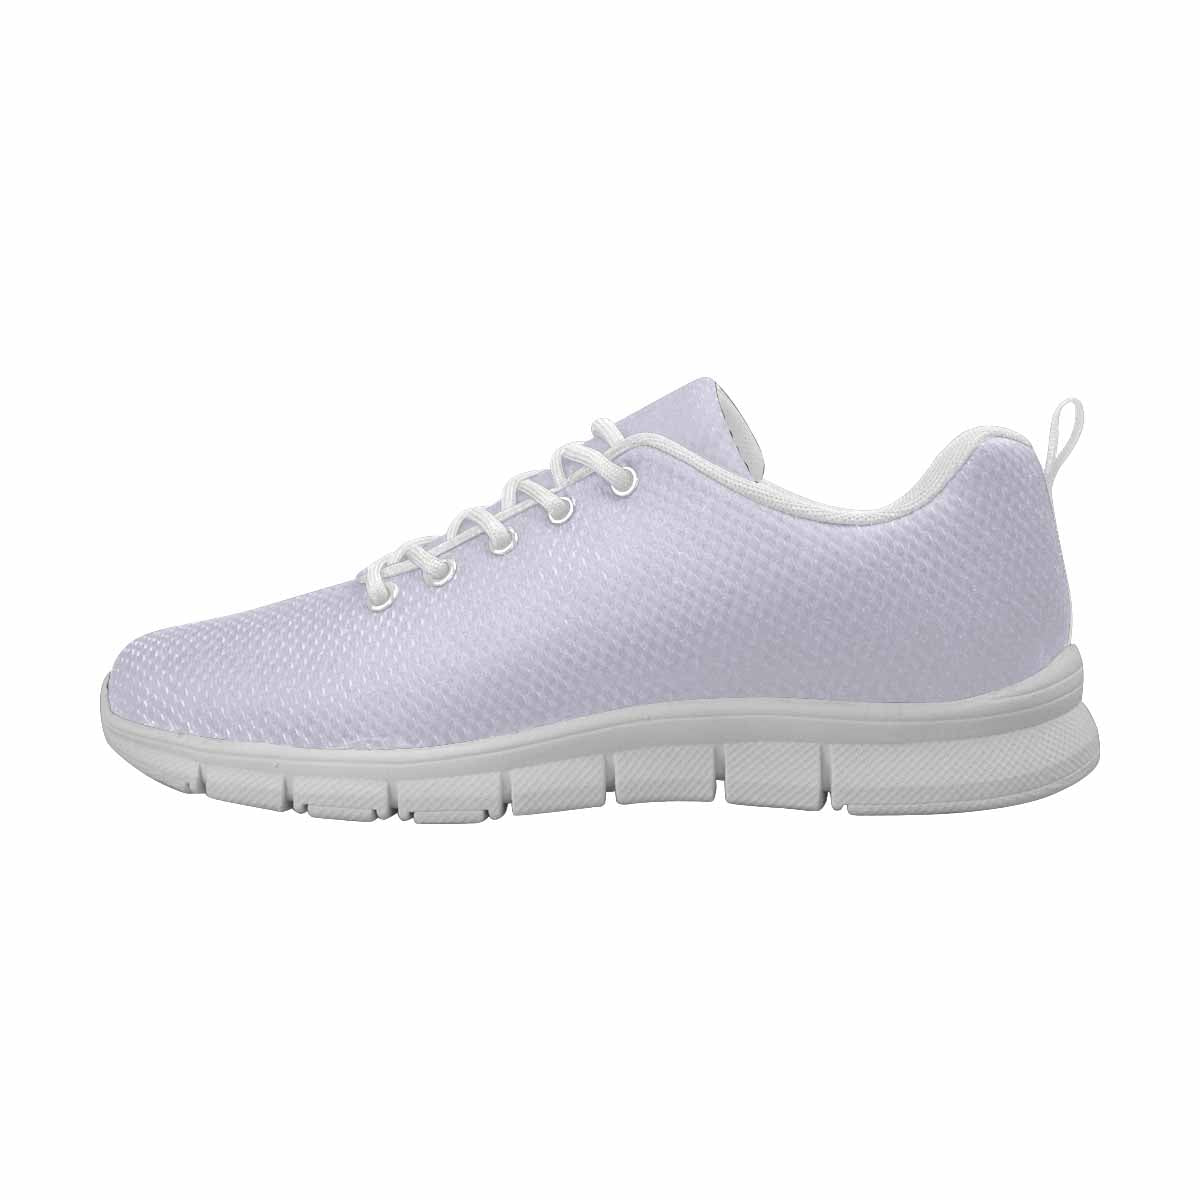 Sneakers For Men,    Lavender Purple   - Running Shoes